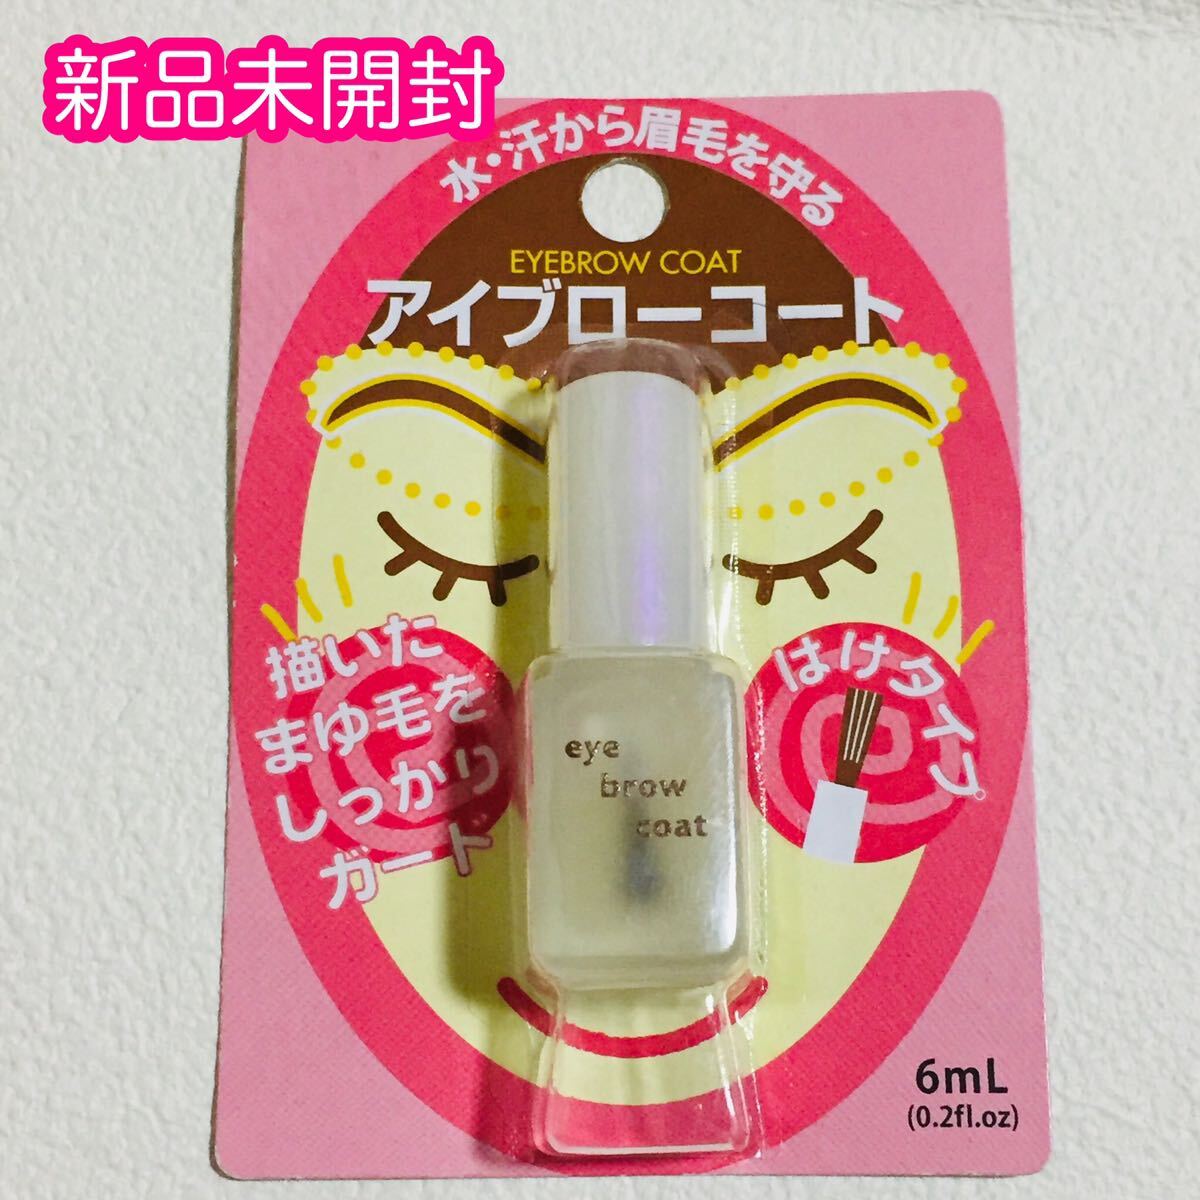 # free shipping #DAISO Daiso / sun parco / eyebrow coat / eyebrows coat / rare / waste number goods / rare goods /6ml/ new goods unopened 